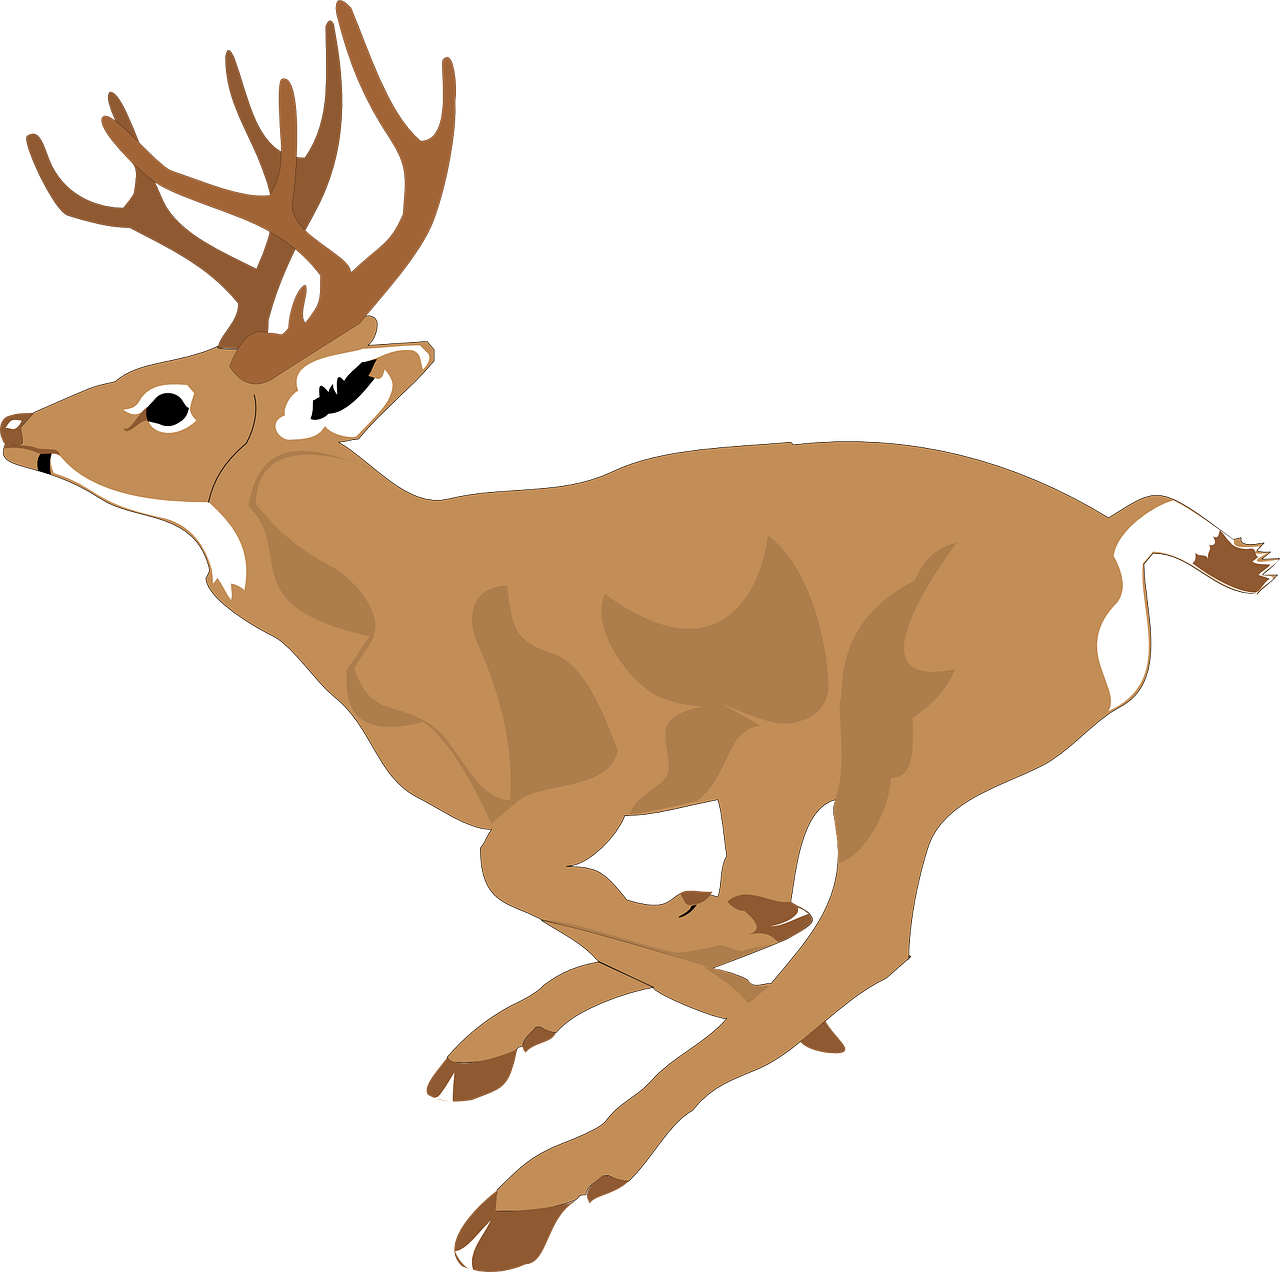 a close up of a deer on a black background, an illustration of, mingei, mid air shot, side view centered, colored accurately, 3/4 view from below